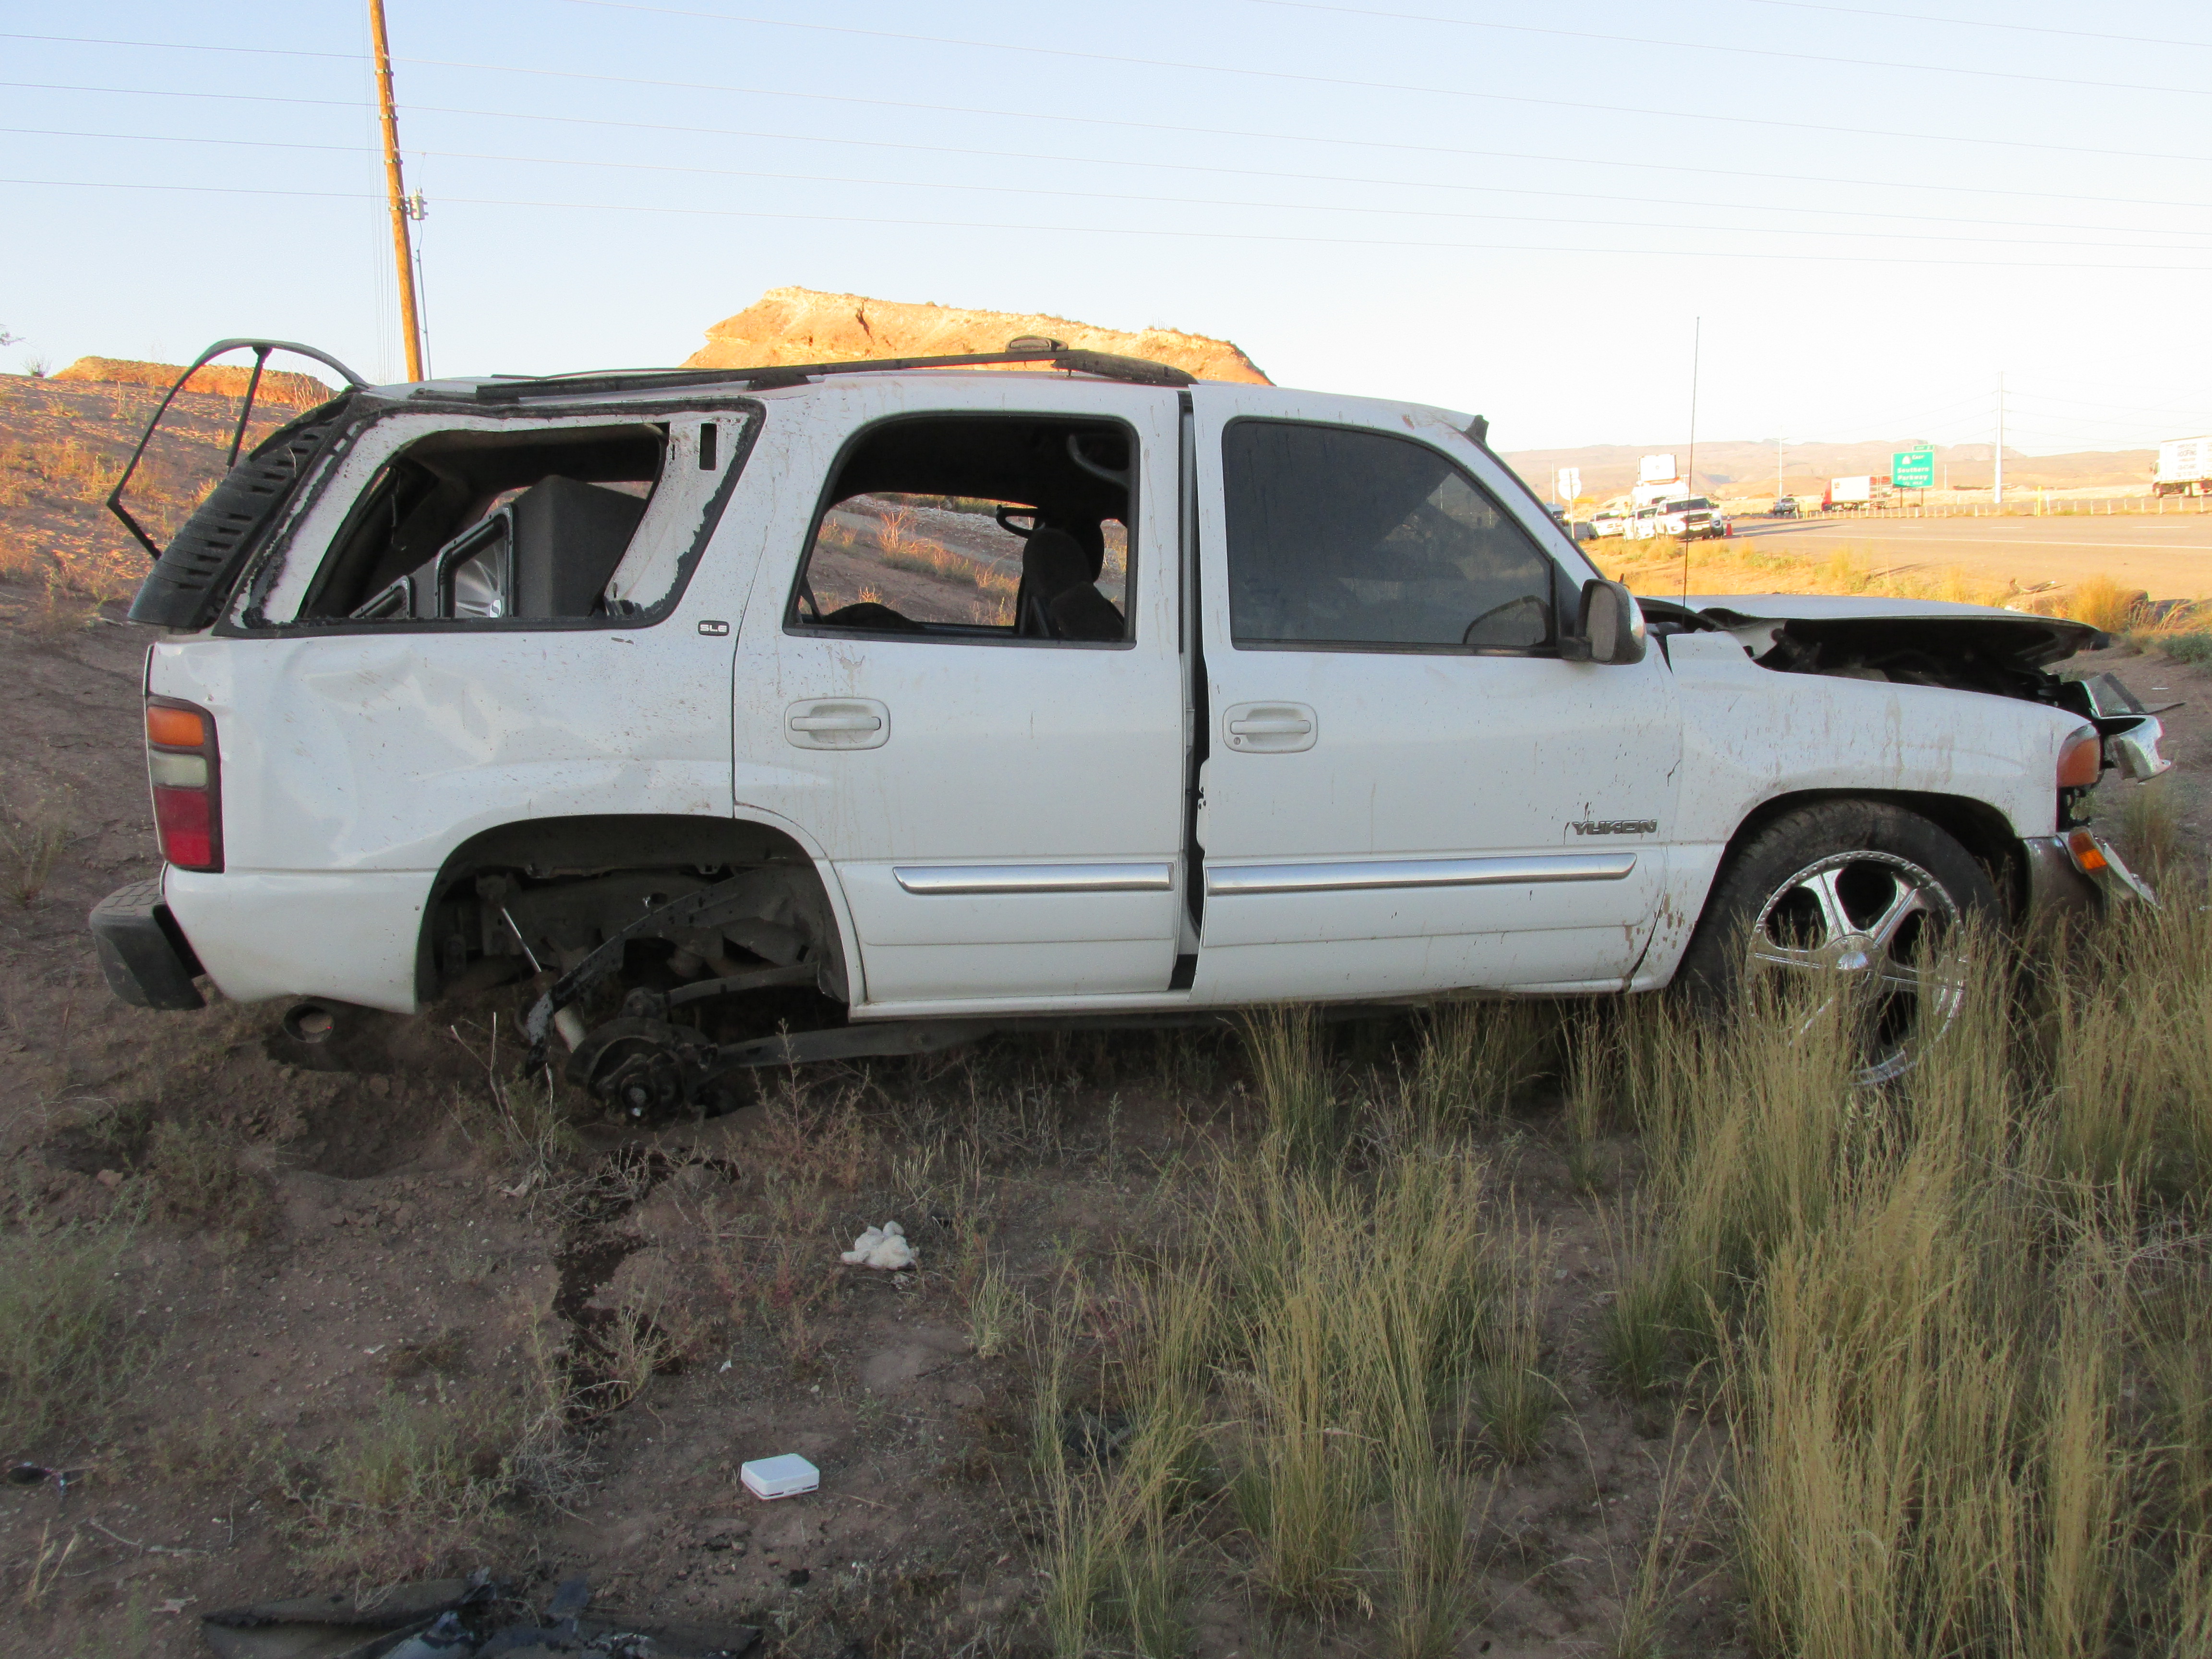 A woman and a boy are in critical condition after the car they were in rolled Sunday morning near St. George. Photo: Utah Highway Patrol